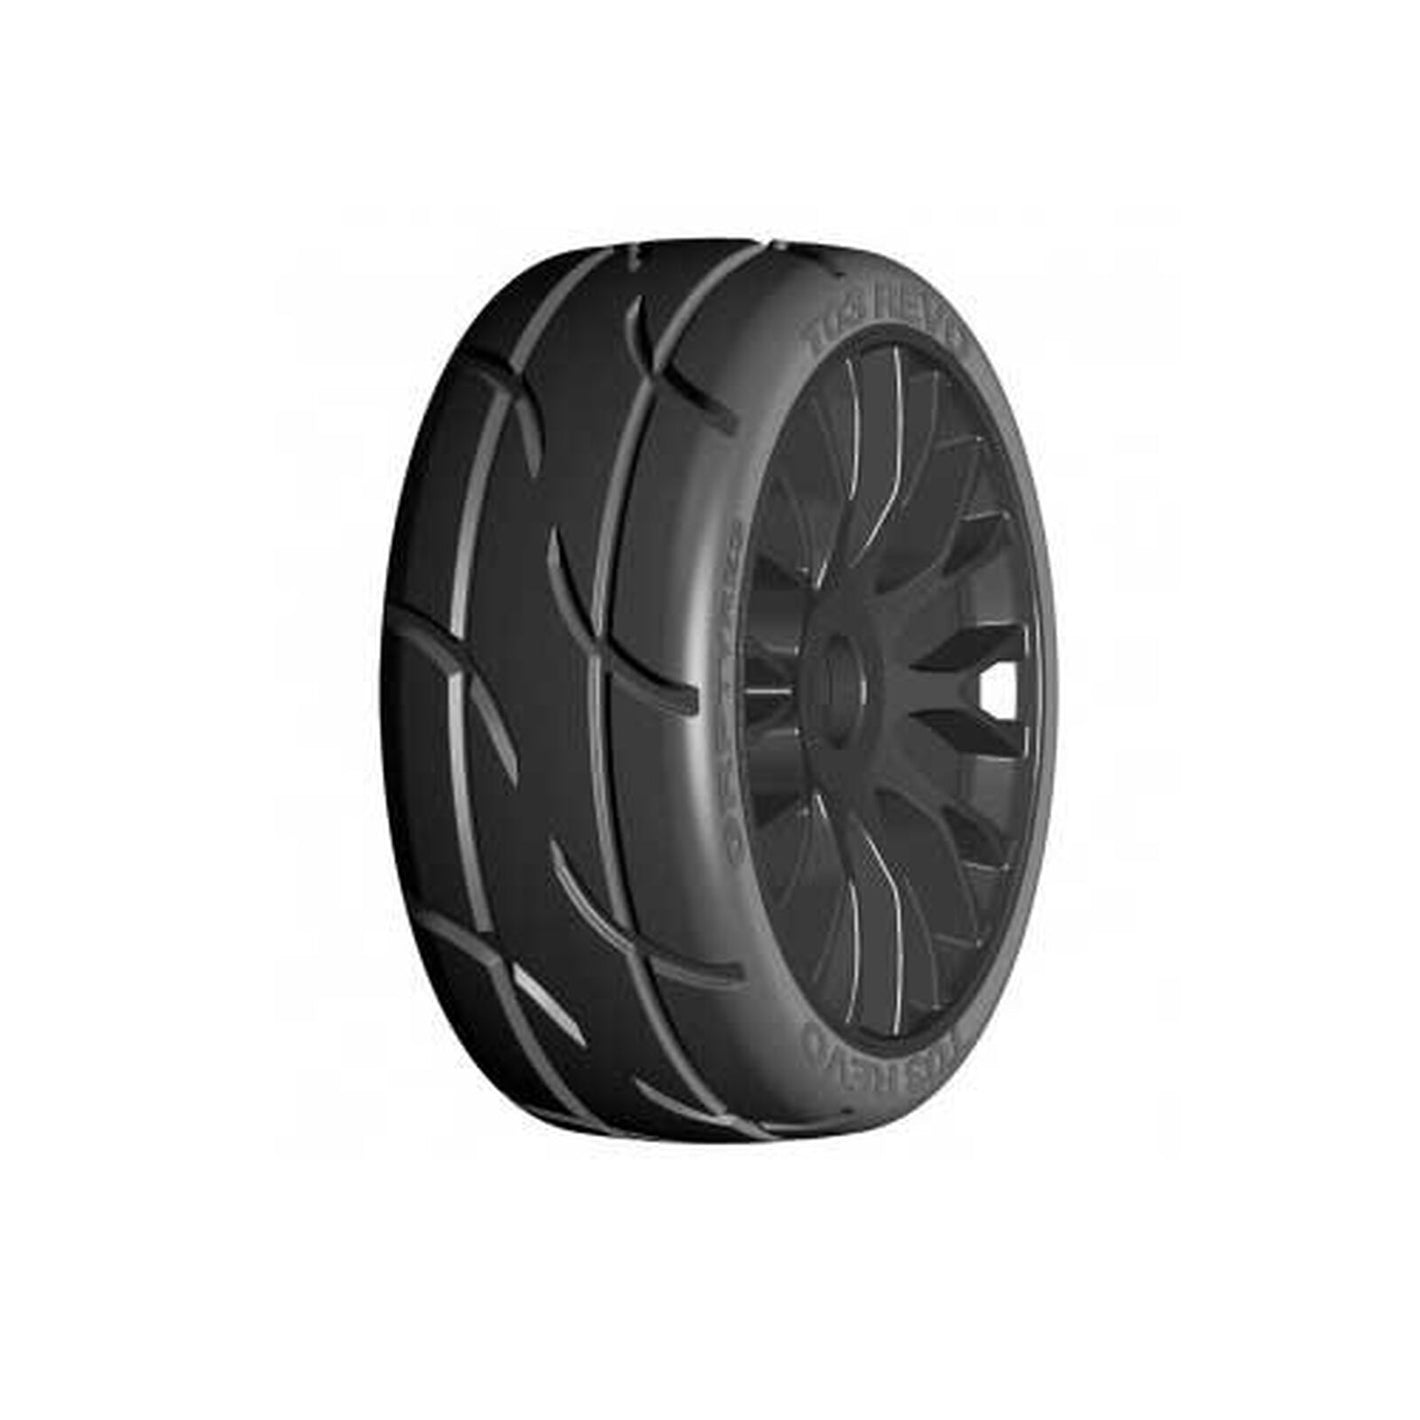 TO3 Revo Belted Pre-Mounted 1/8 Buggy Tires w/FLEX Wheel (XB1) (Black)